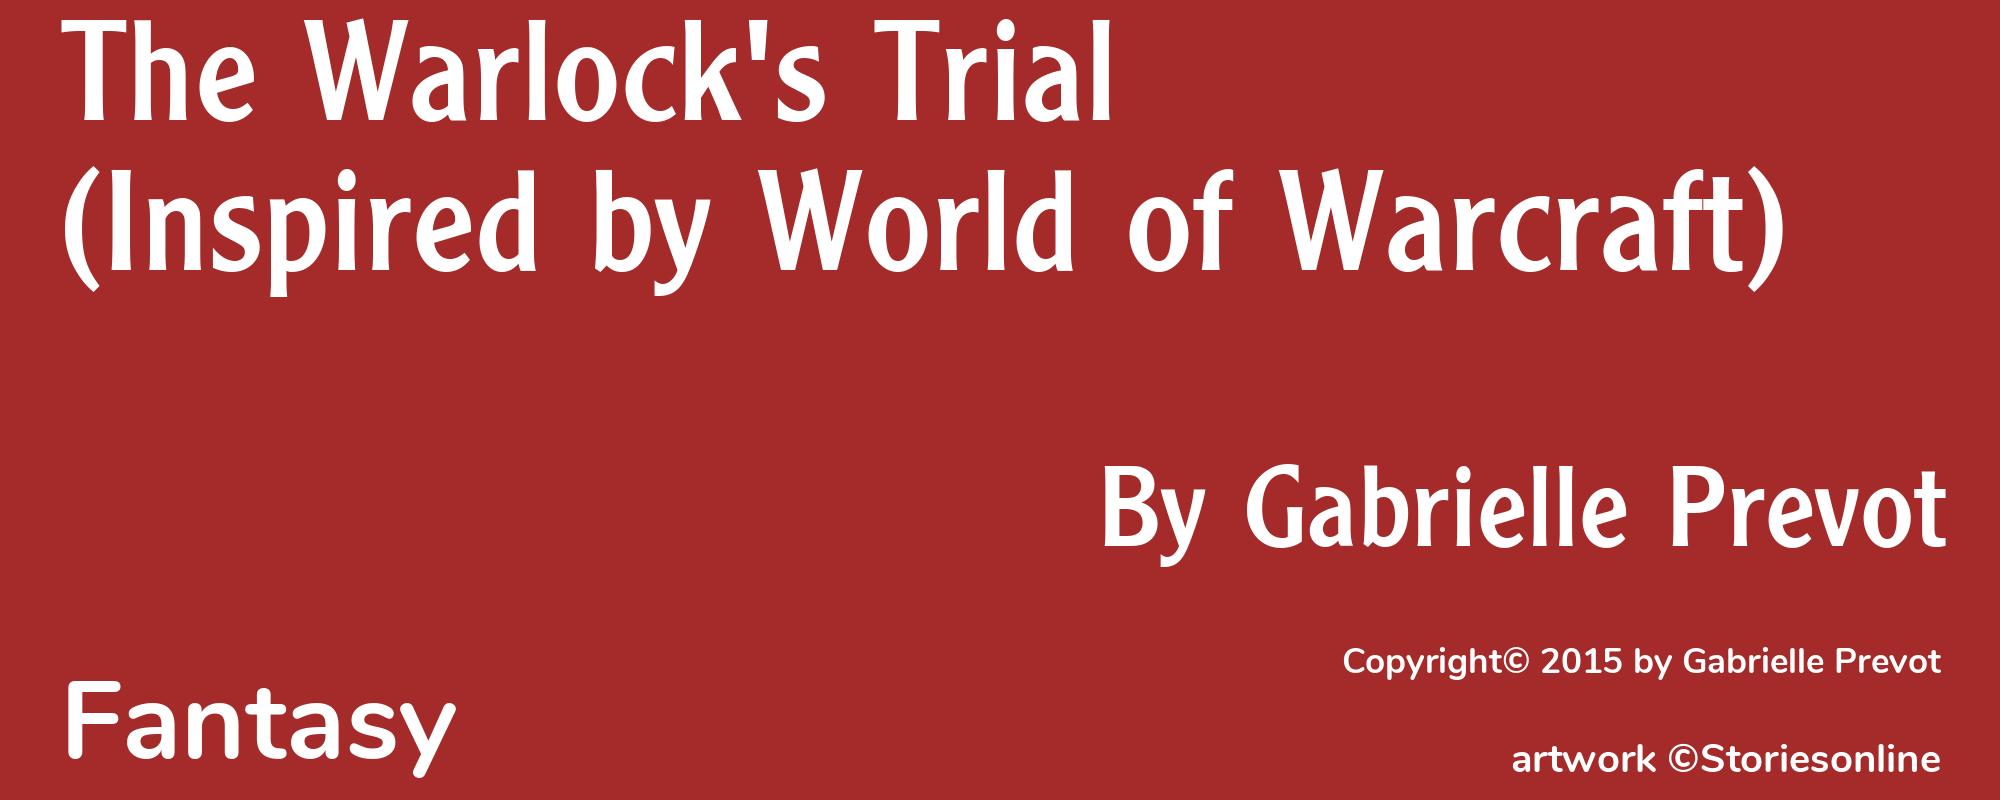 The Warlock's Trial (Inspired by World of Warcraft) - Cover